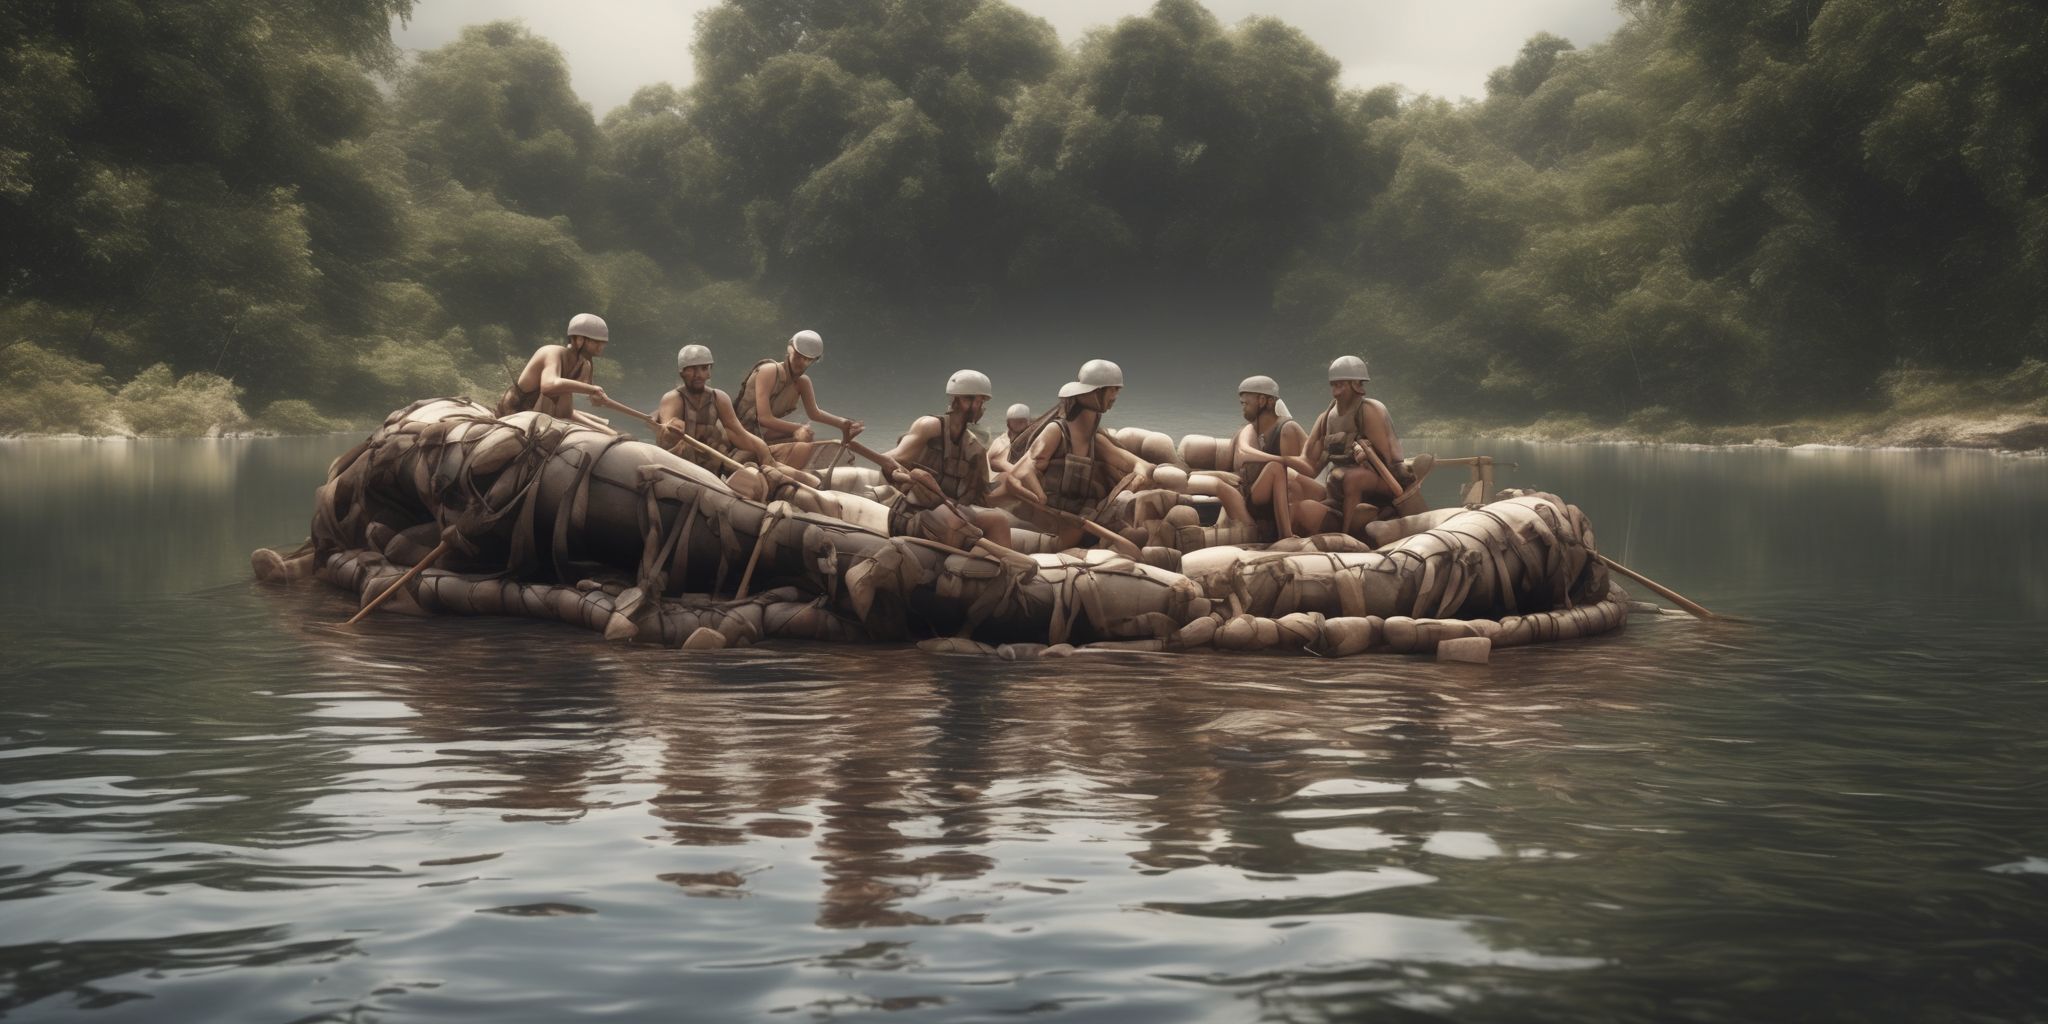 Raft  in realistic, photographic style